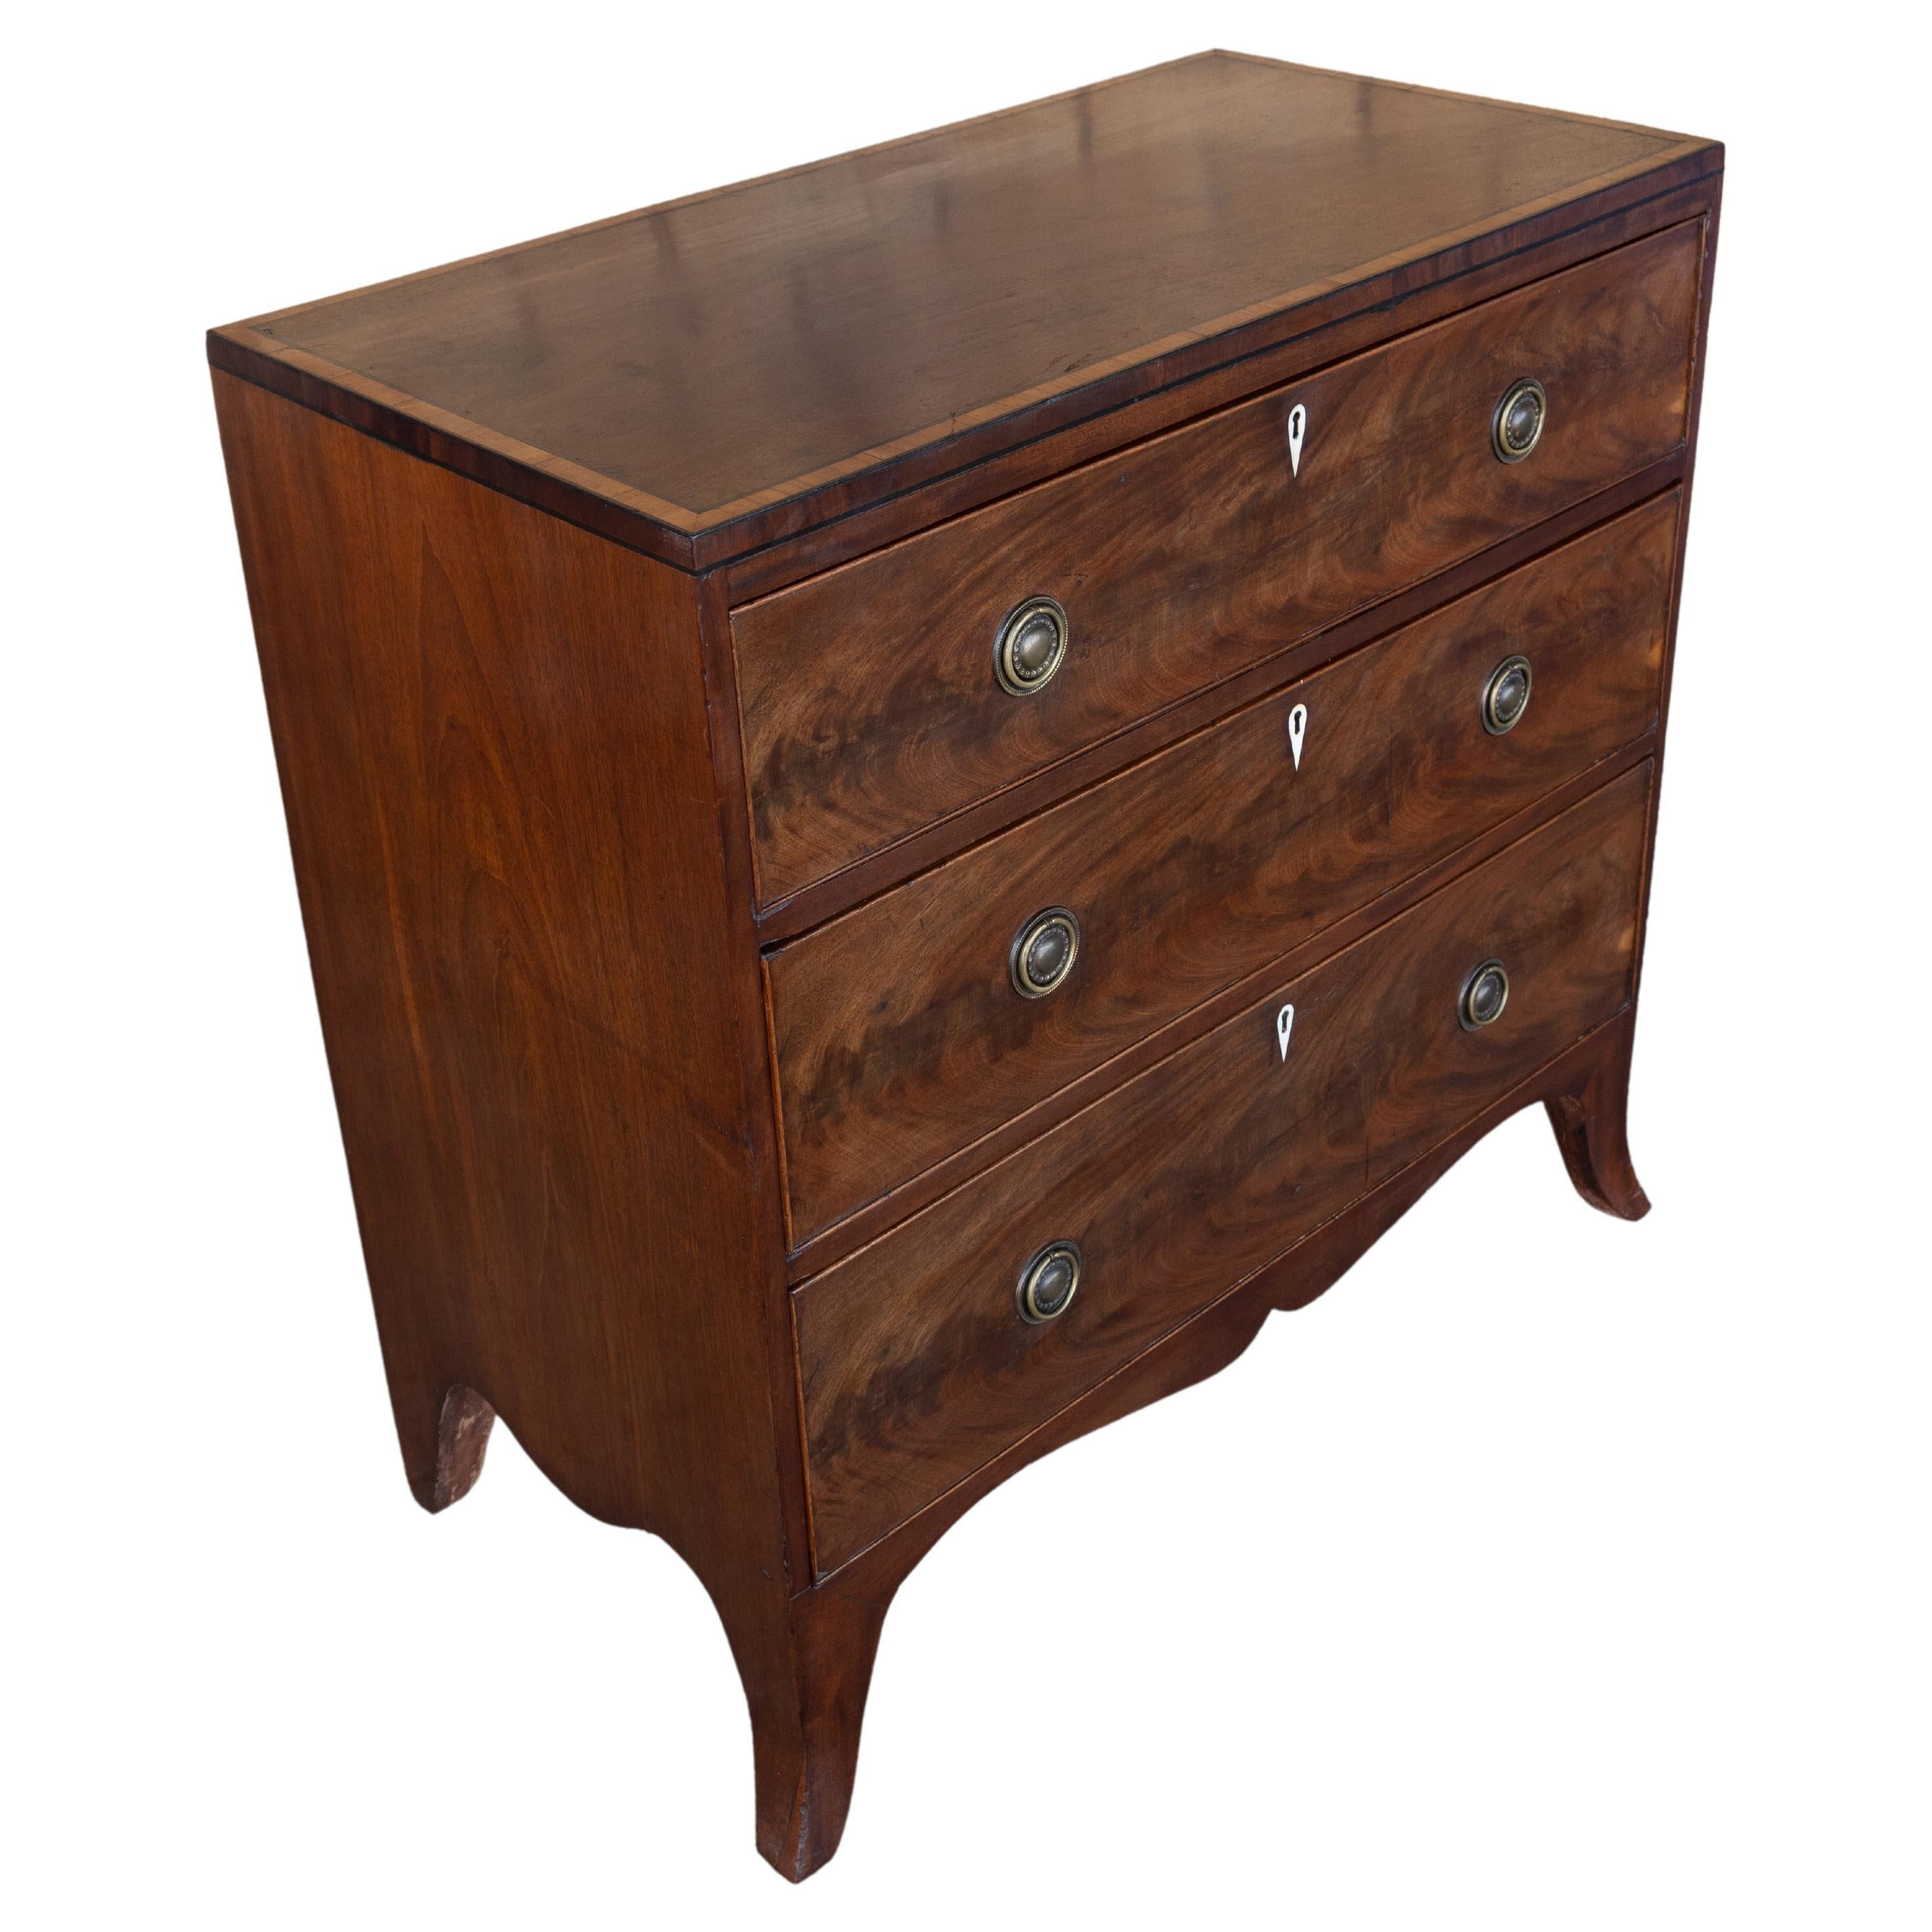 Mahogany Antique English 19th Century Regency Diminutive Chest Of Drawers C.1810 For Sale